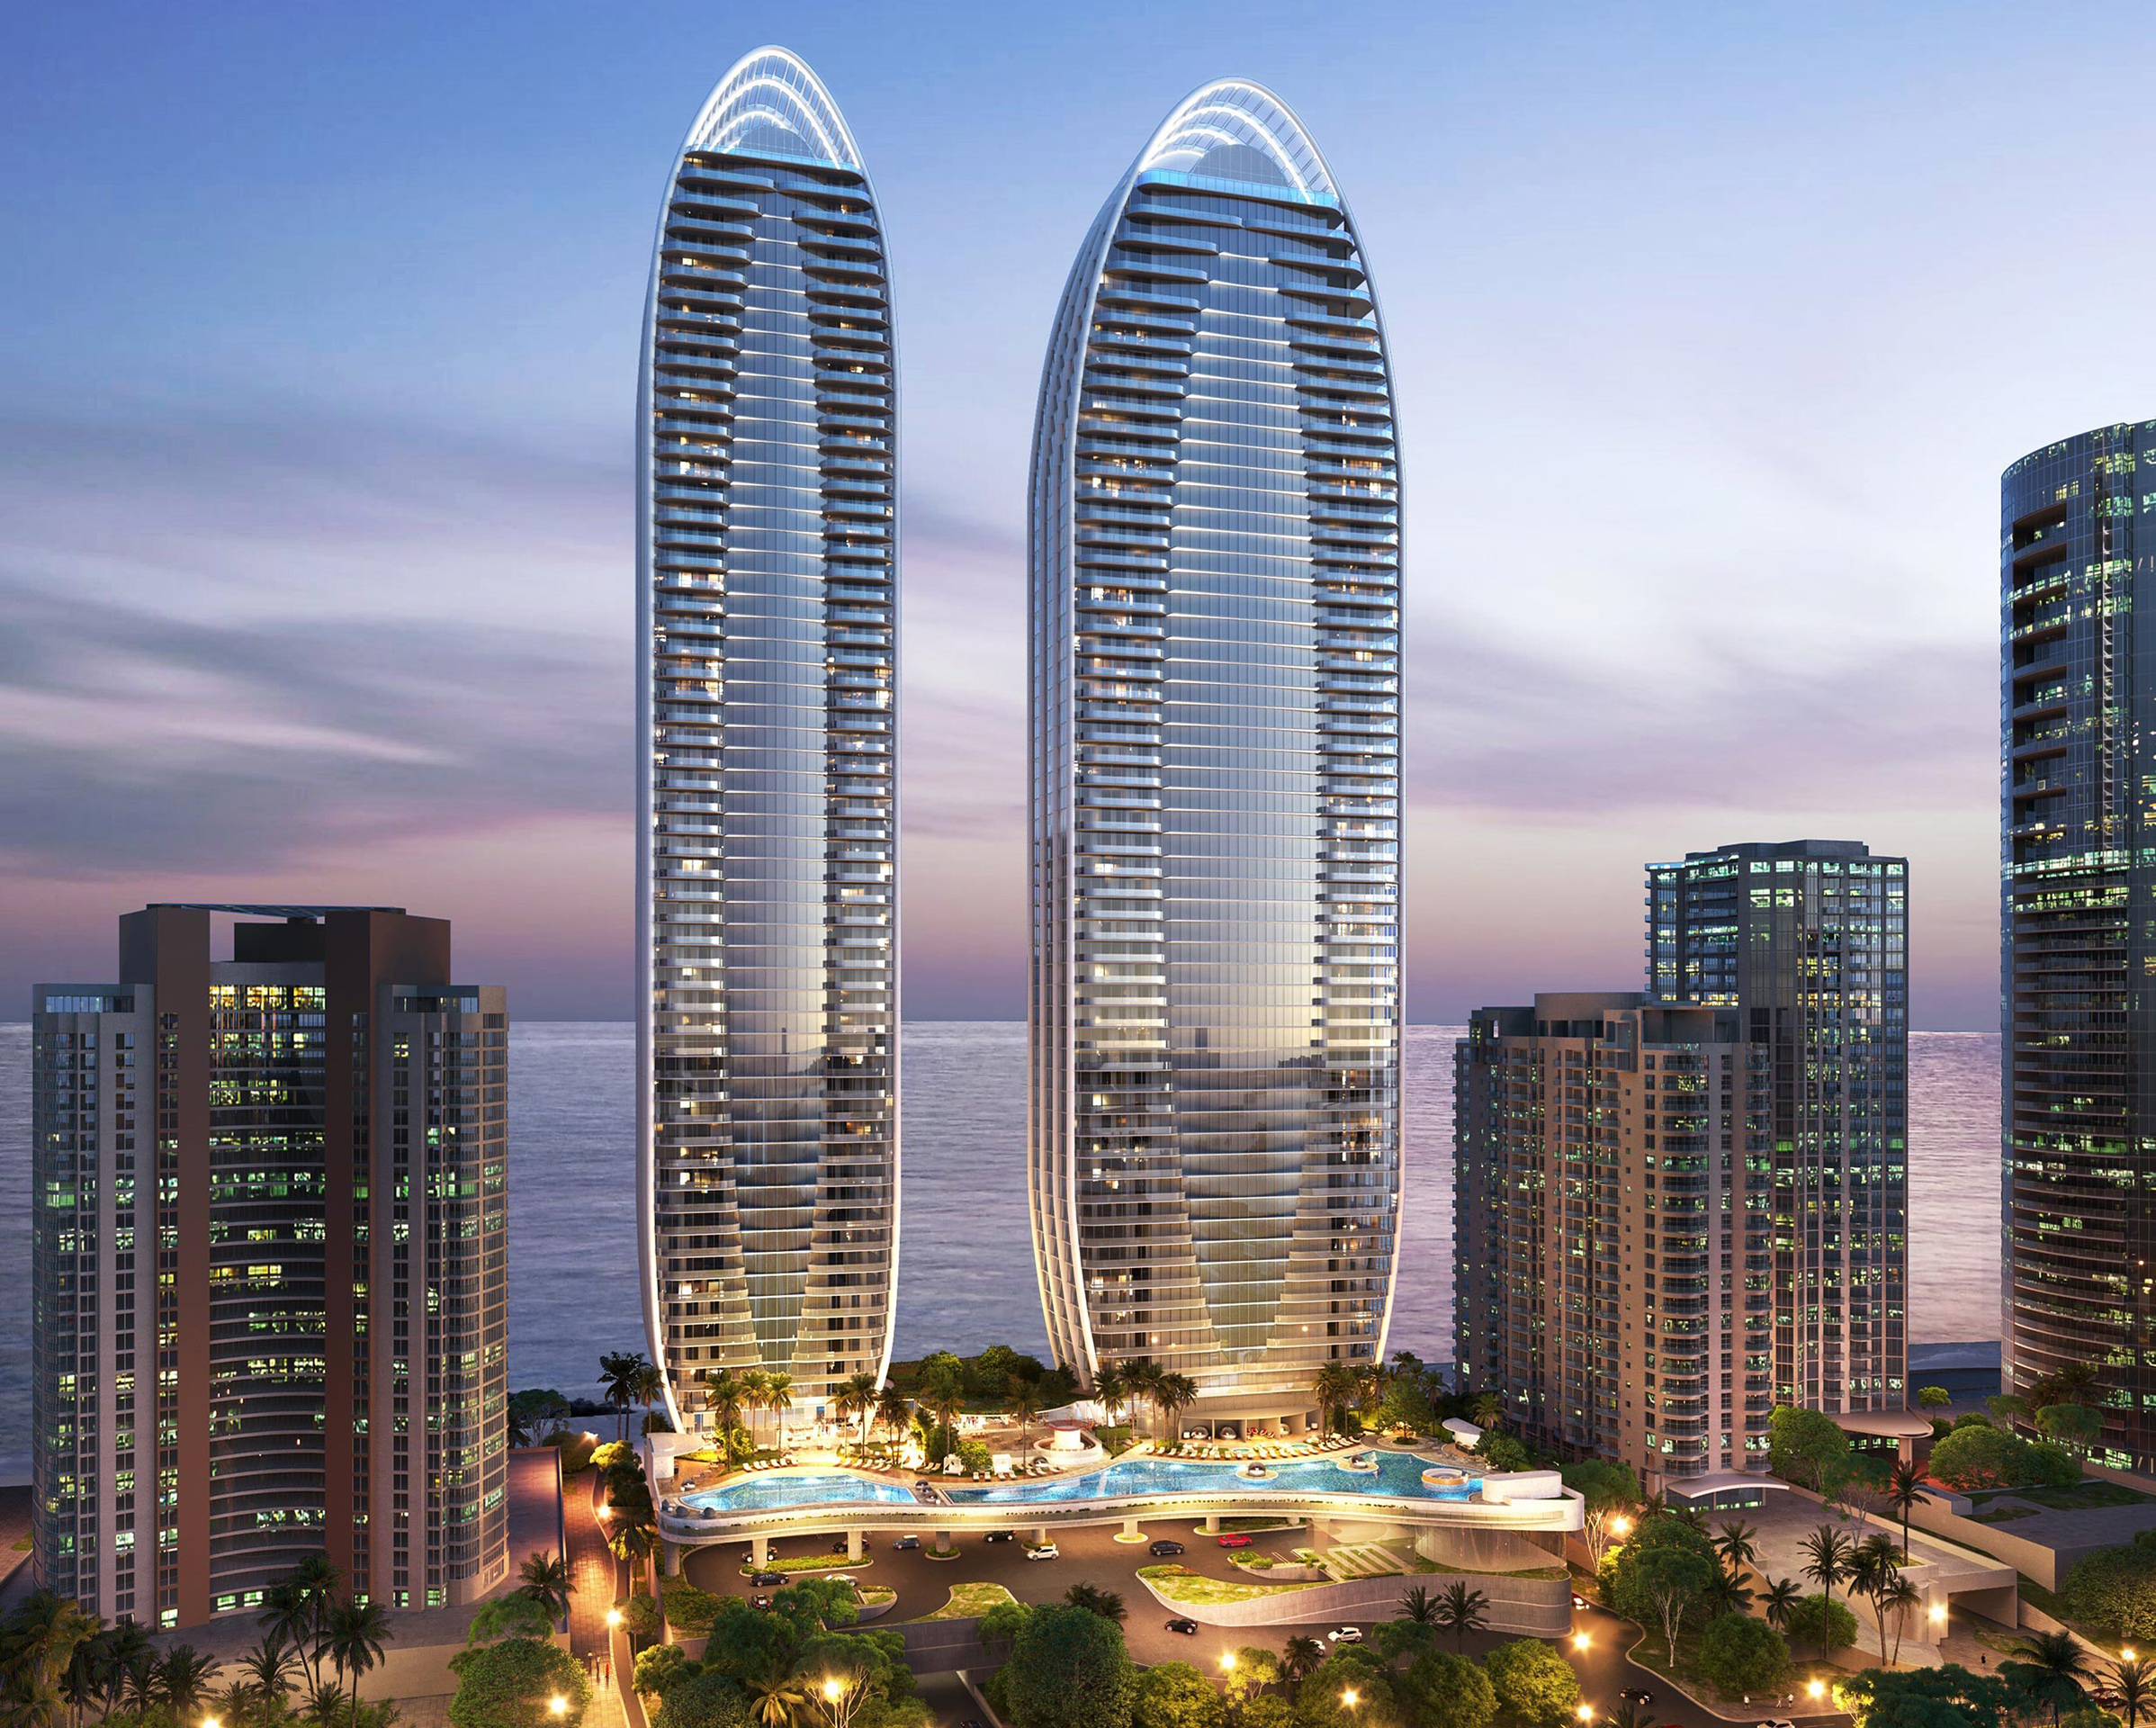 St. Regis Sunny Isles switches to a contract model and will feature photovoltaic glass